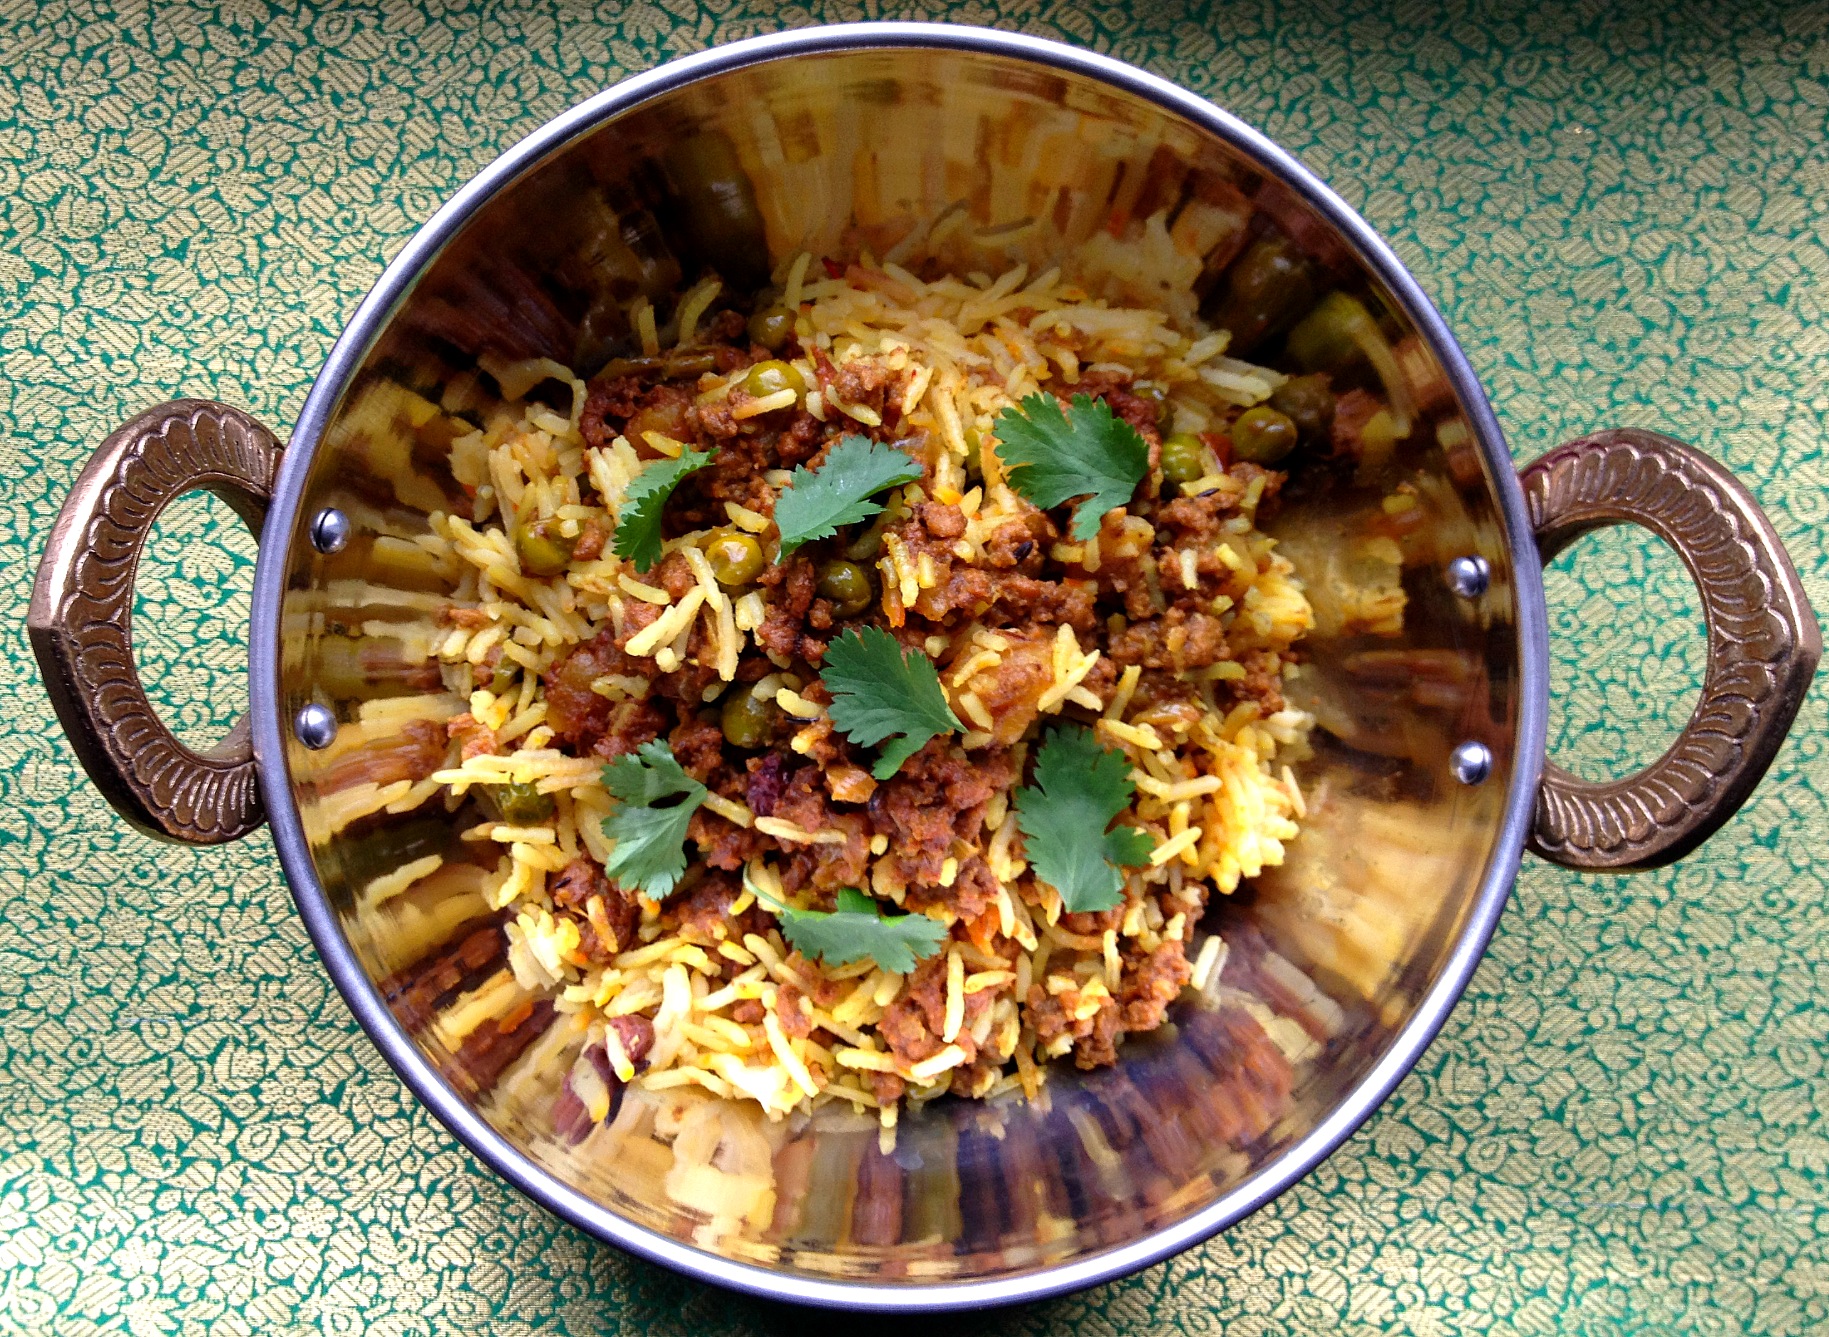 Lamb Keema in a copper bowl on green and gold tablecloth